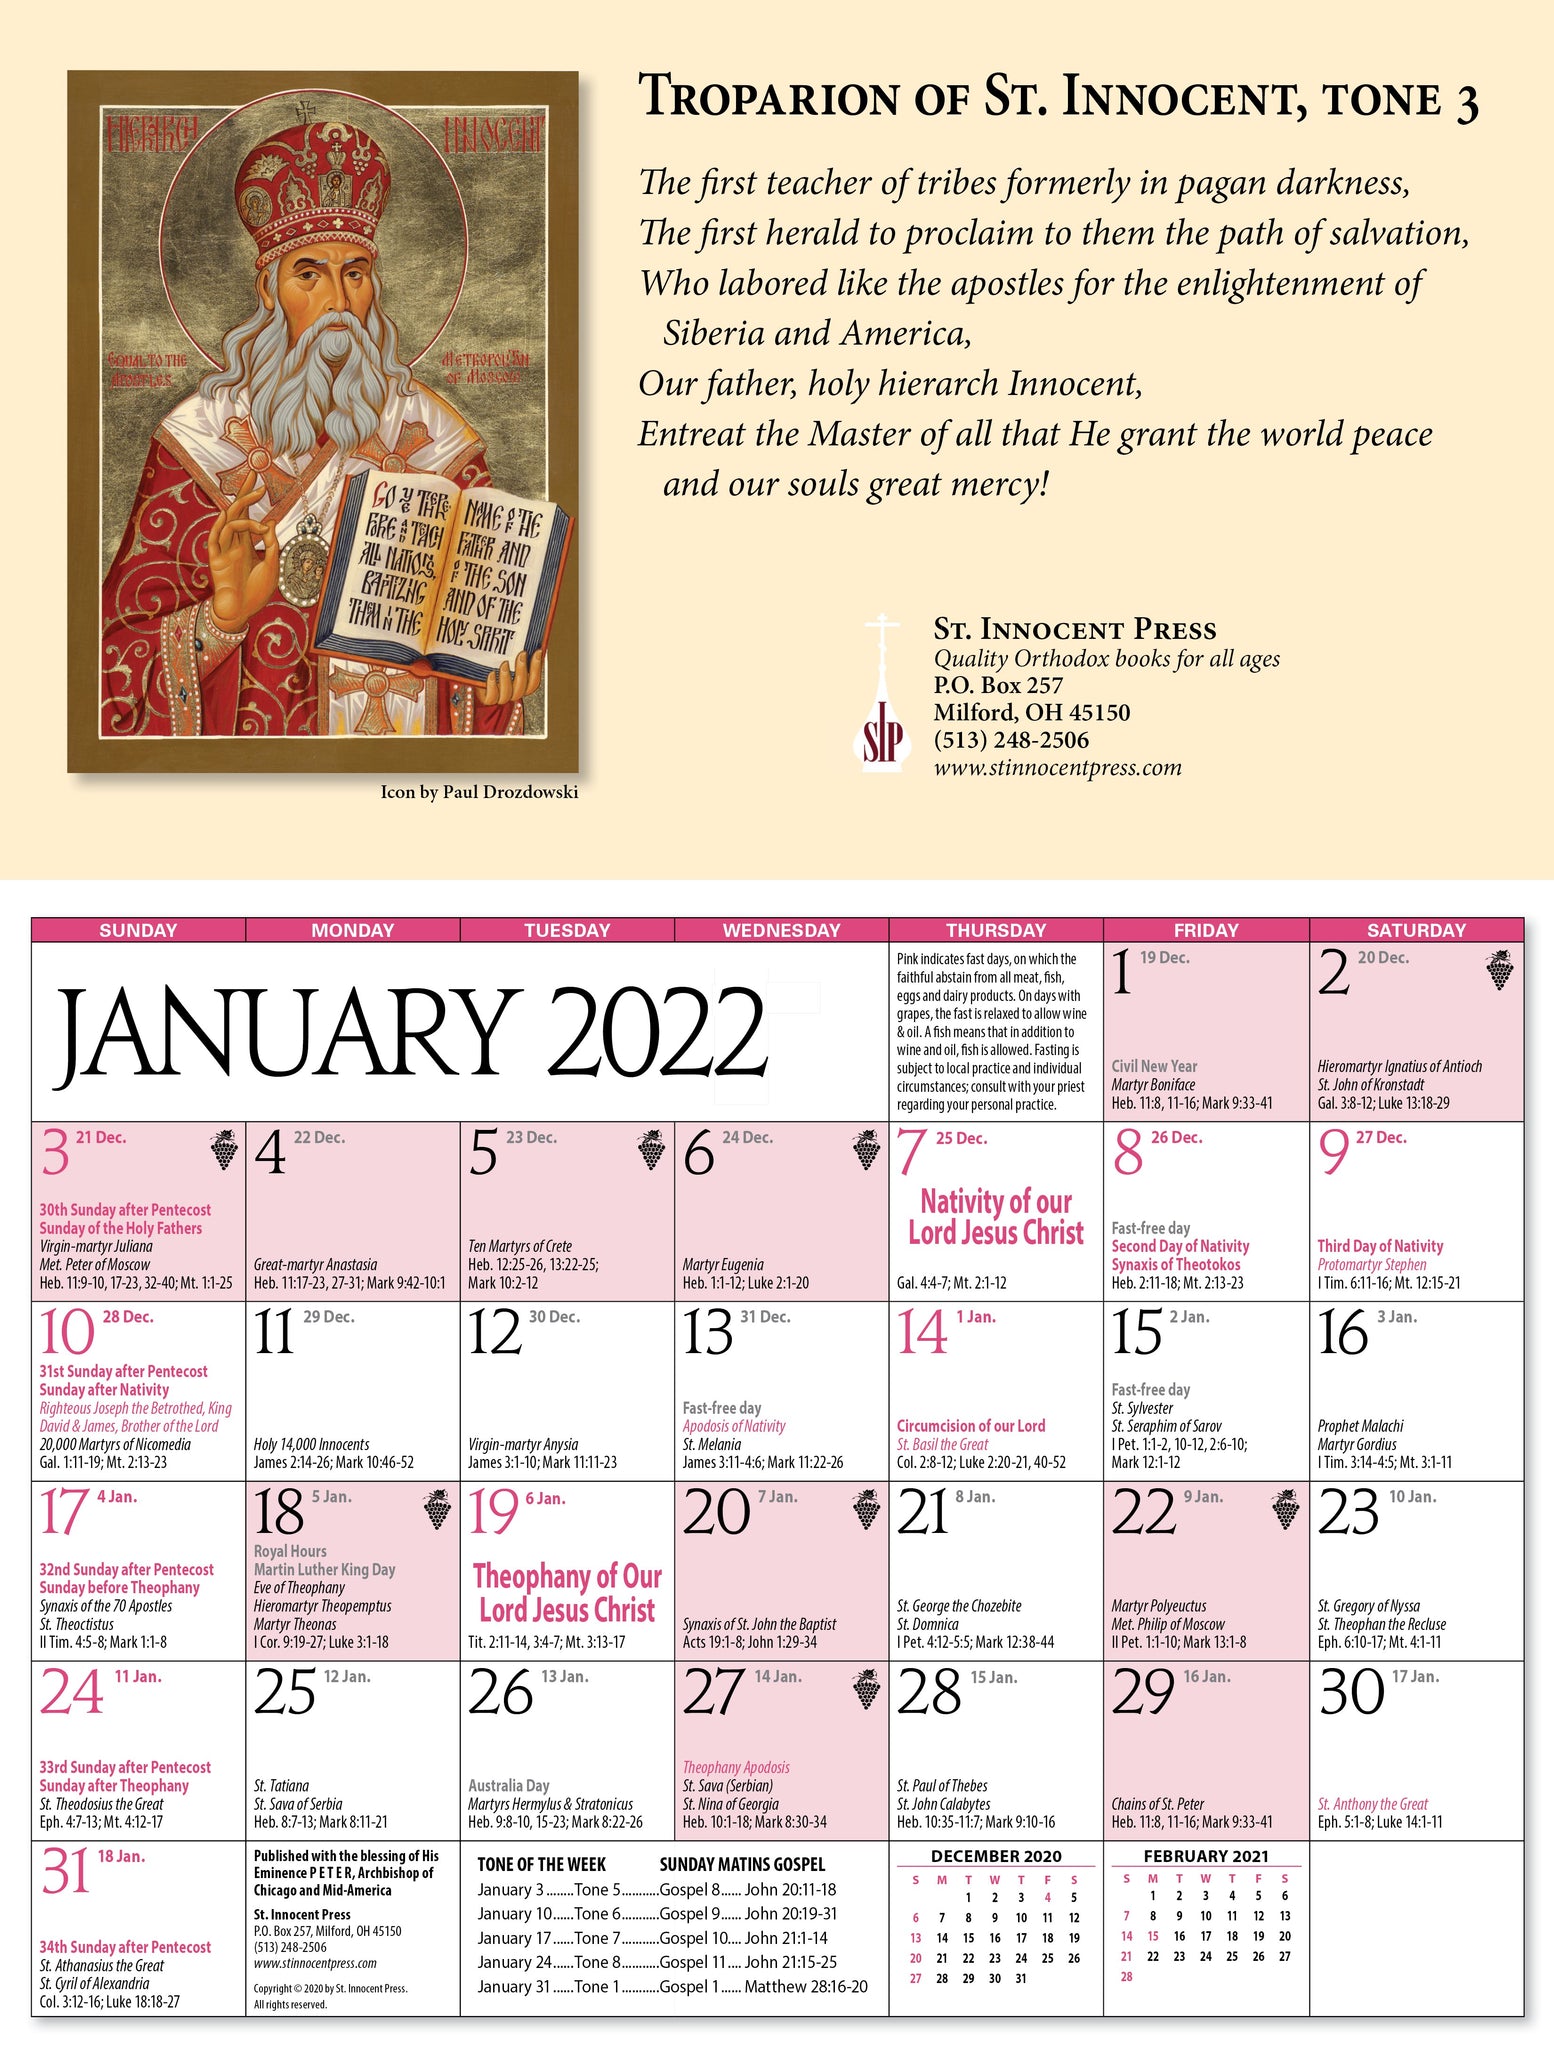 Best Russian Orthodox Calendar 2022 Free Images